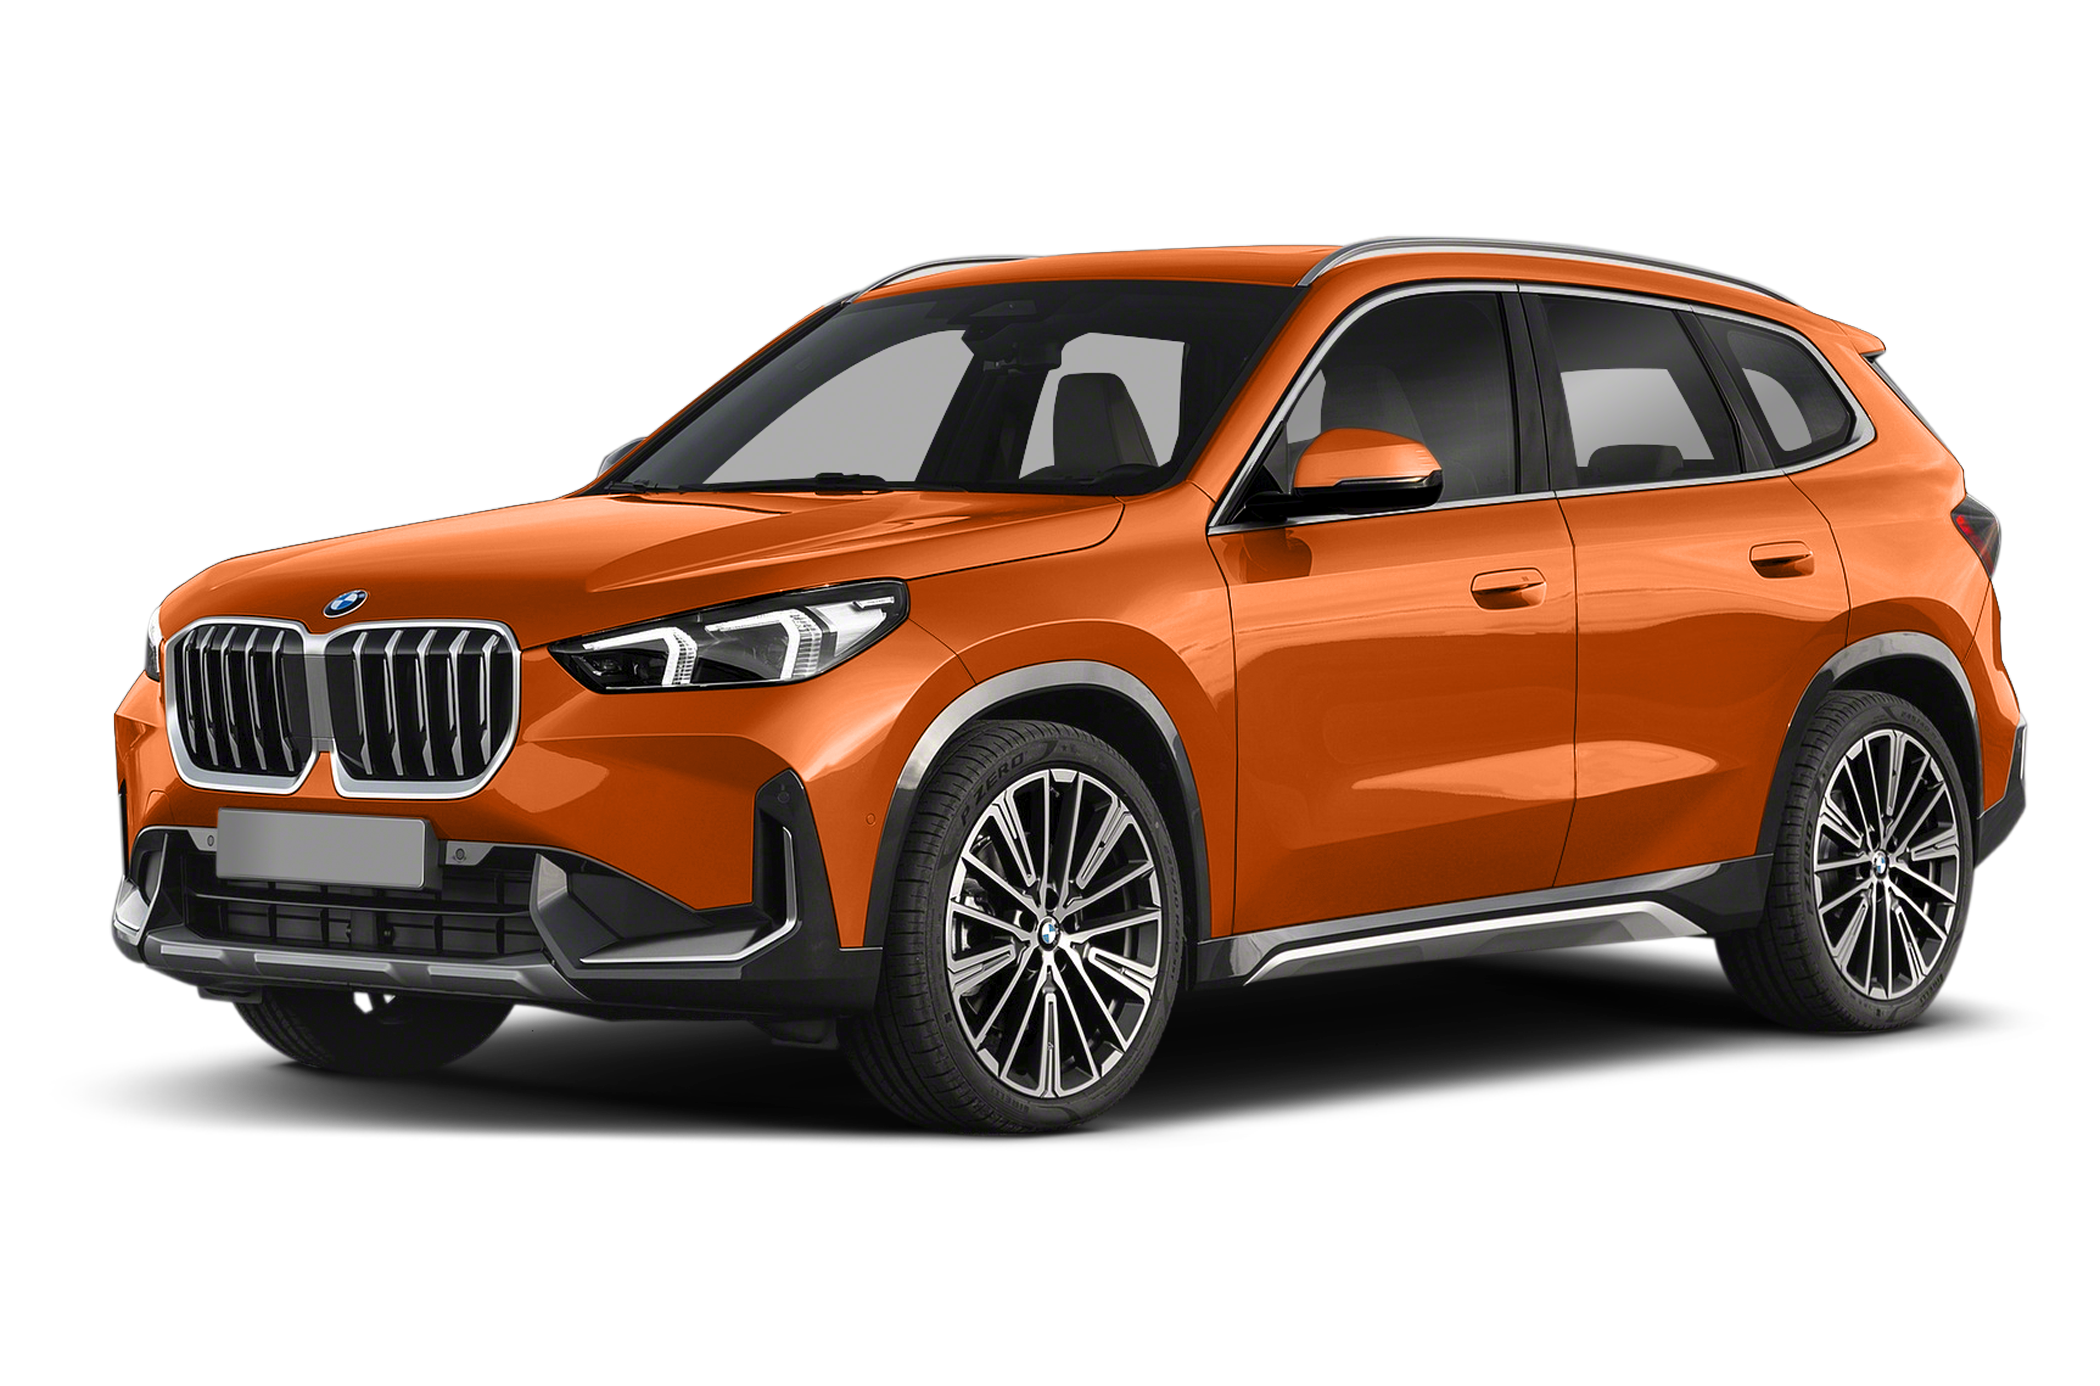 BMW X1 History: Generations, Features and More